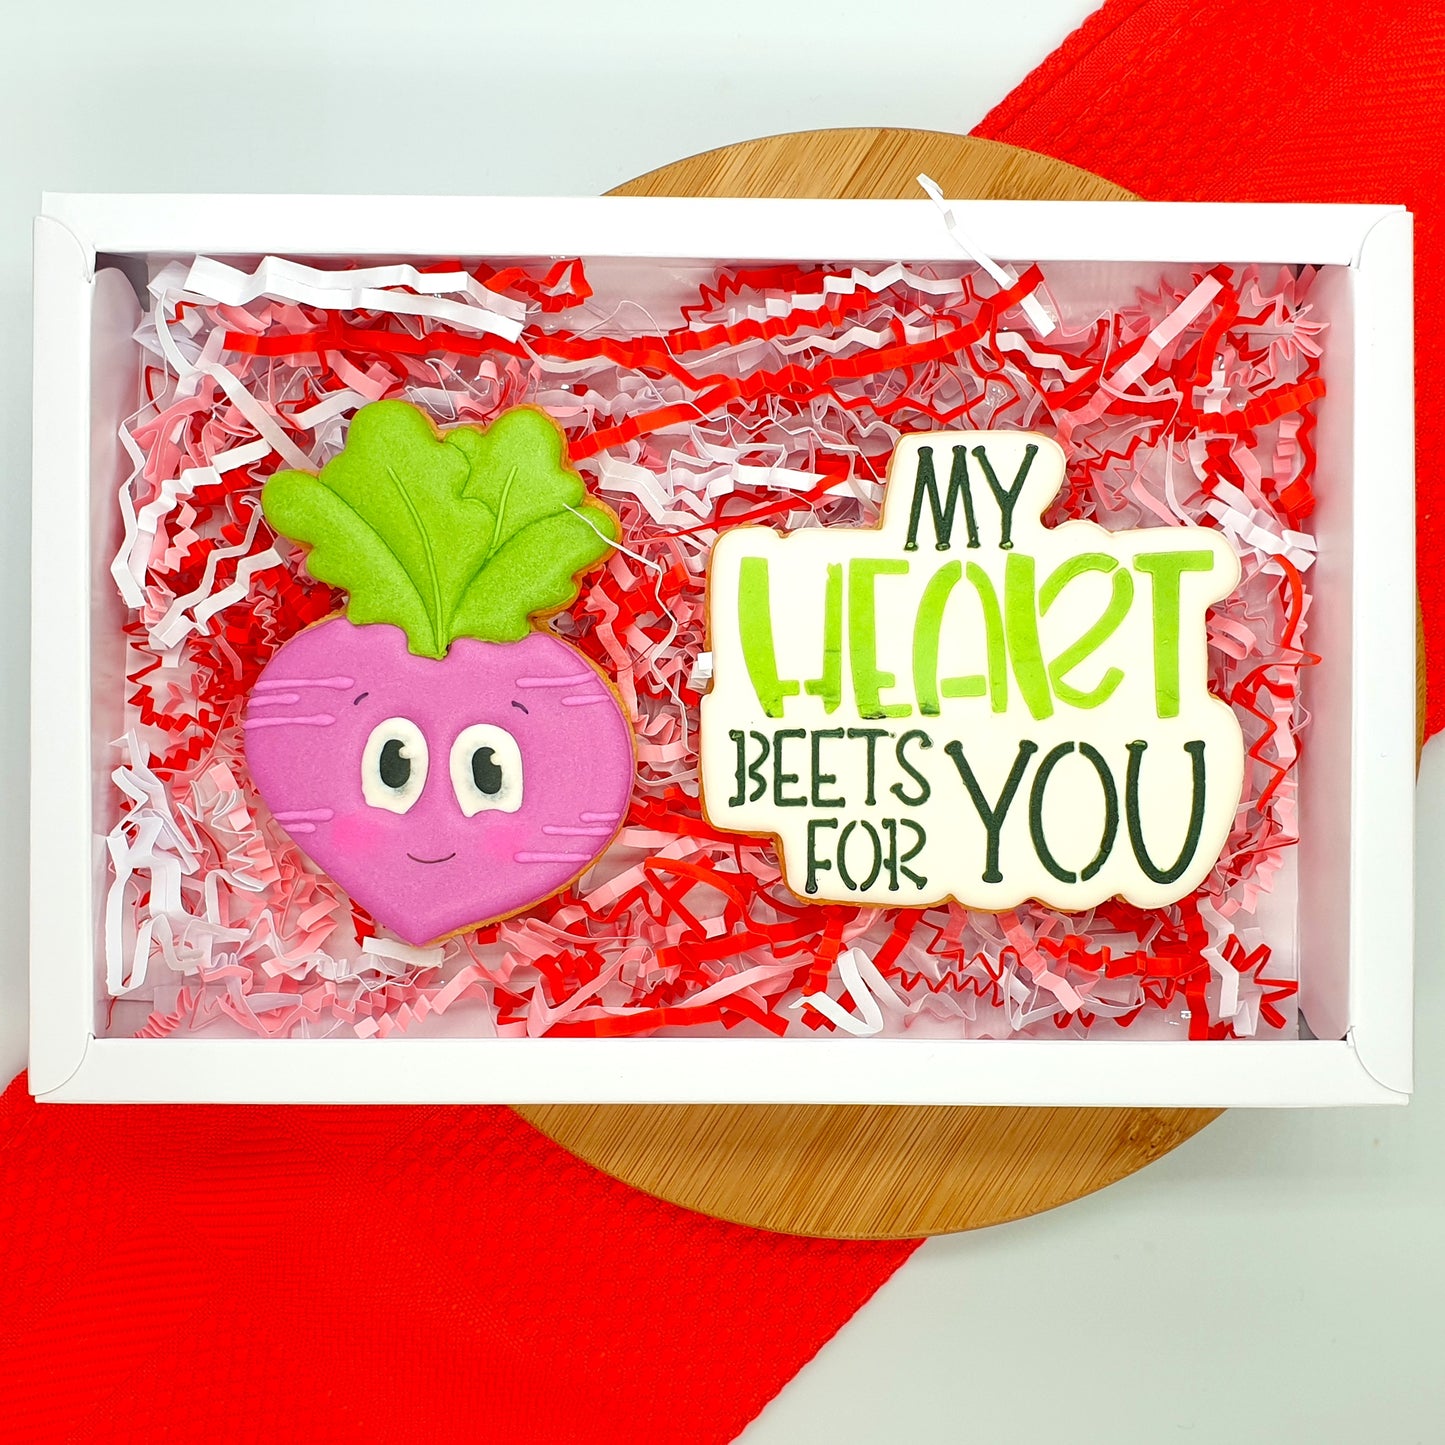 J294 - MY HEART BEETS FOR YOU COOKIE CUTTER SET (Stencil to be Bought Separately)